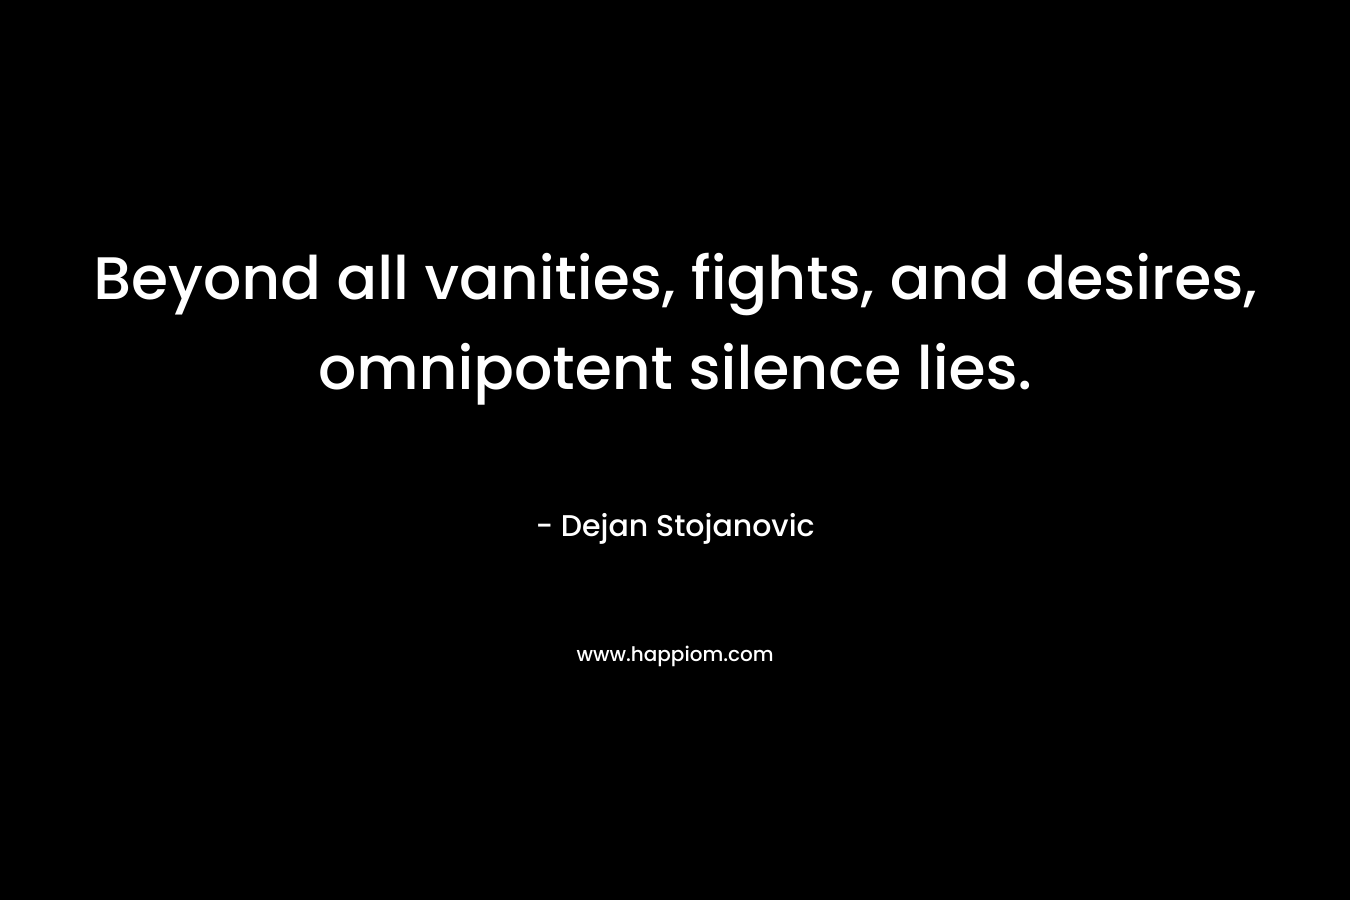 Beyond all vanities, fights, and desires, omnipotent silence lies.